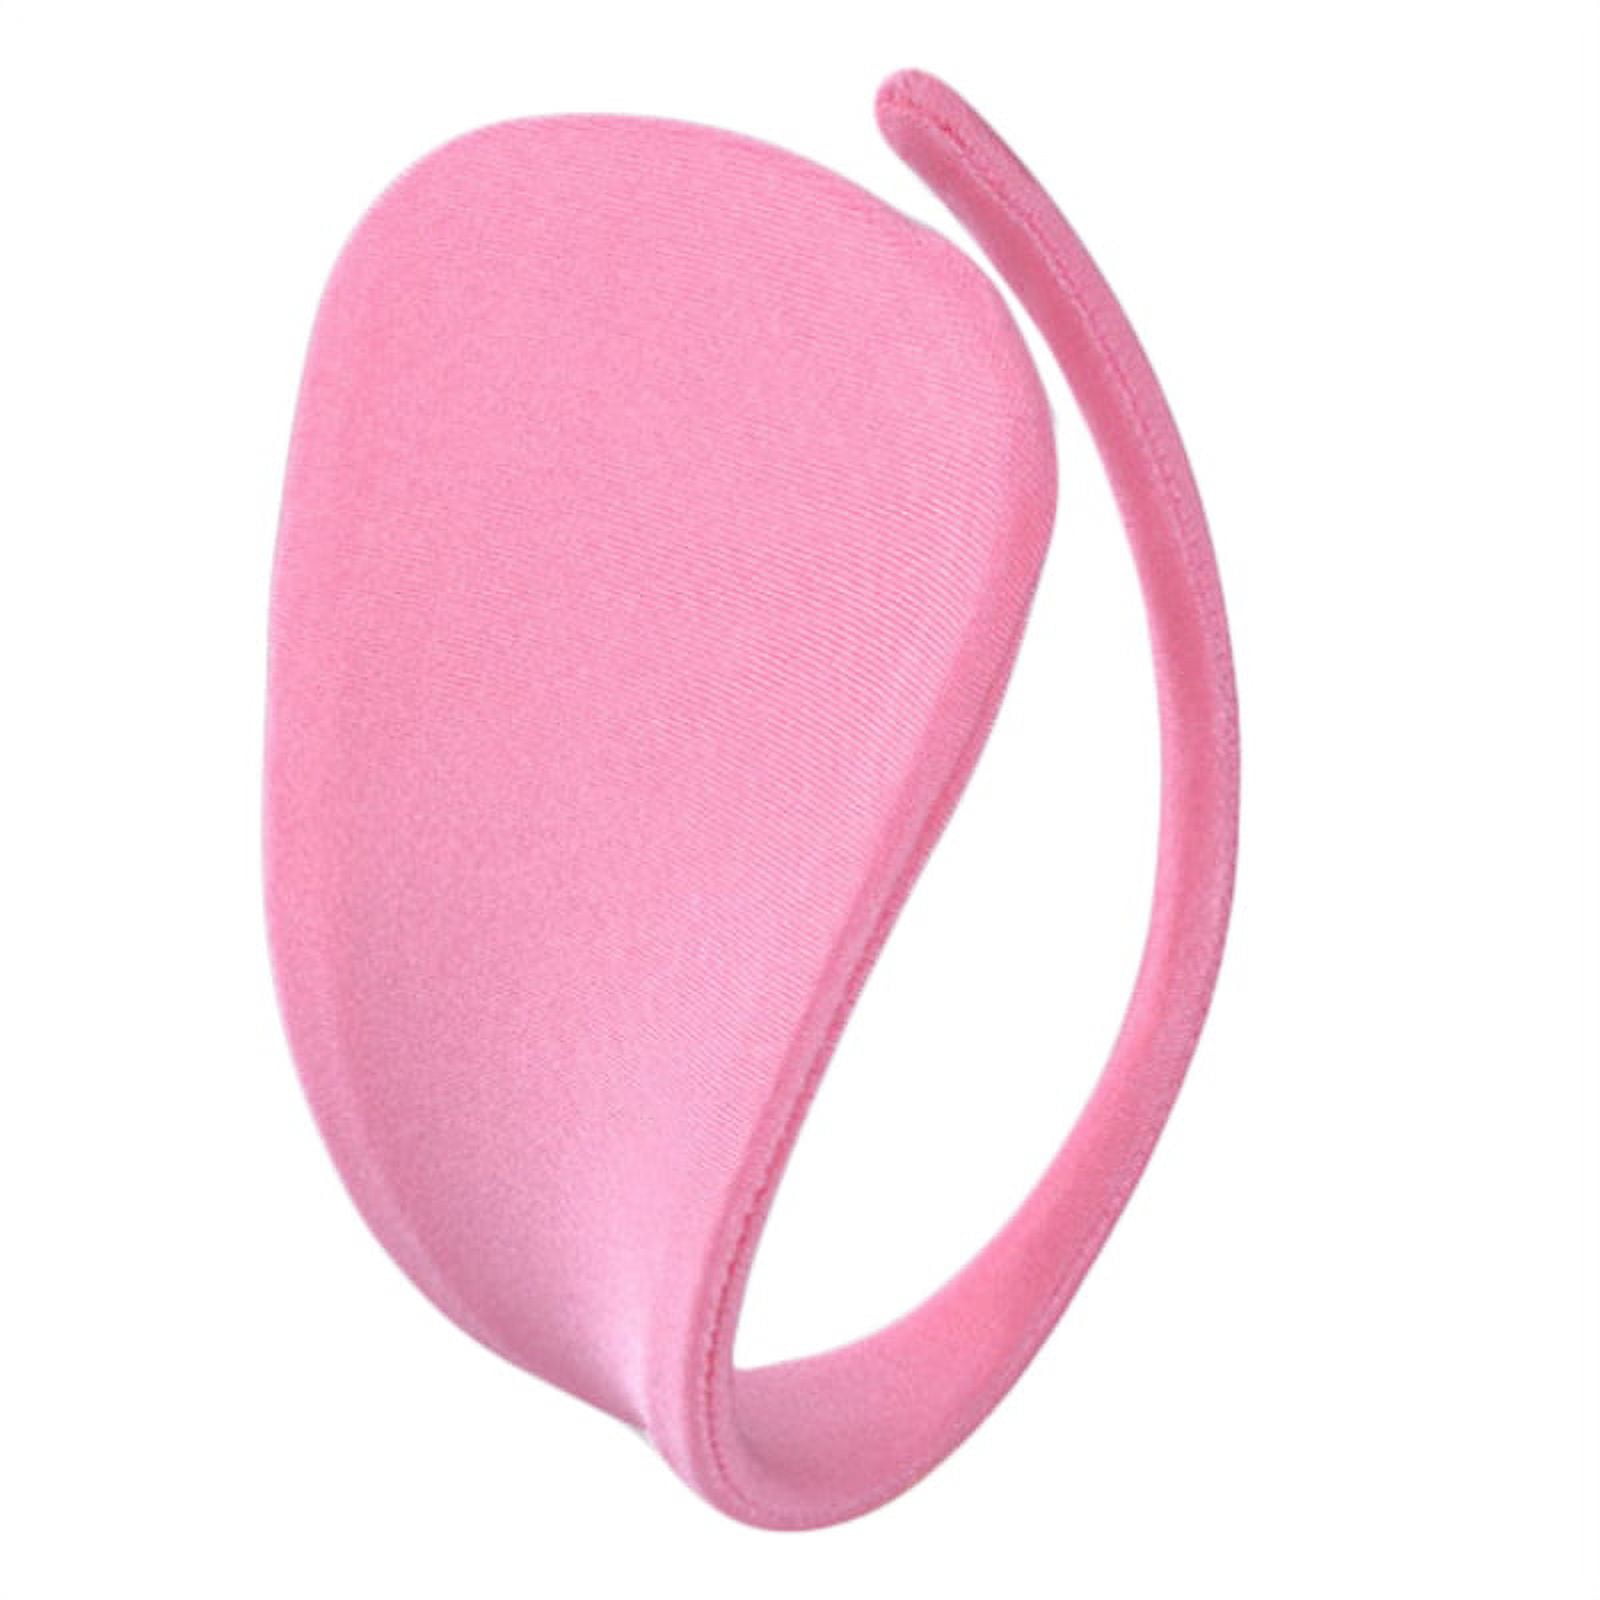 Unique Fashion C-String Panty For Women - Free Size, pink price in UAE,  UAE